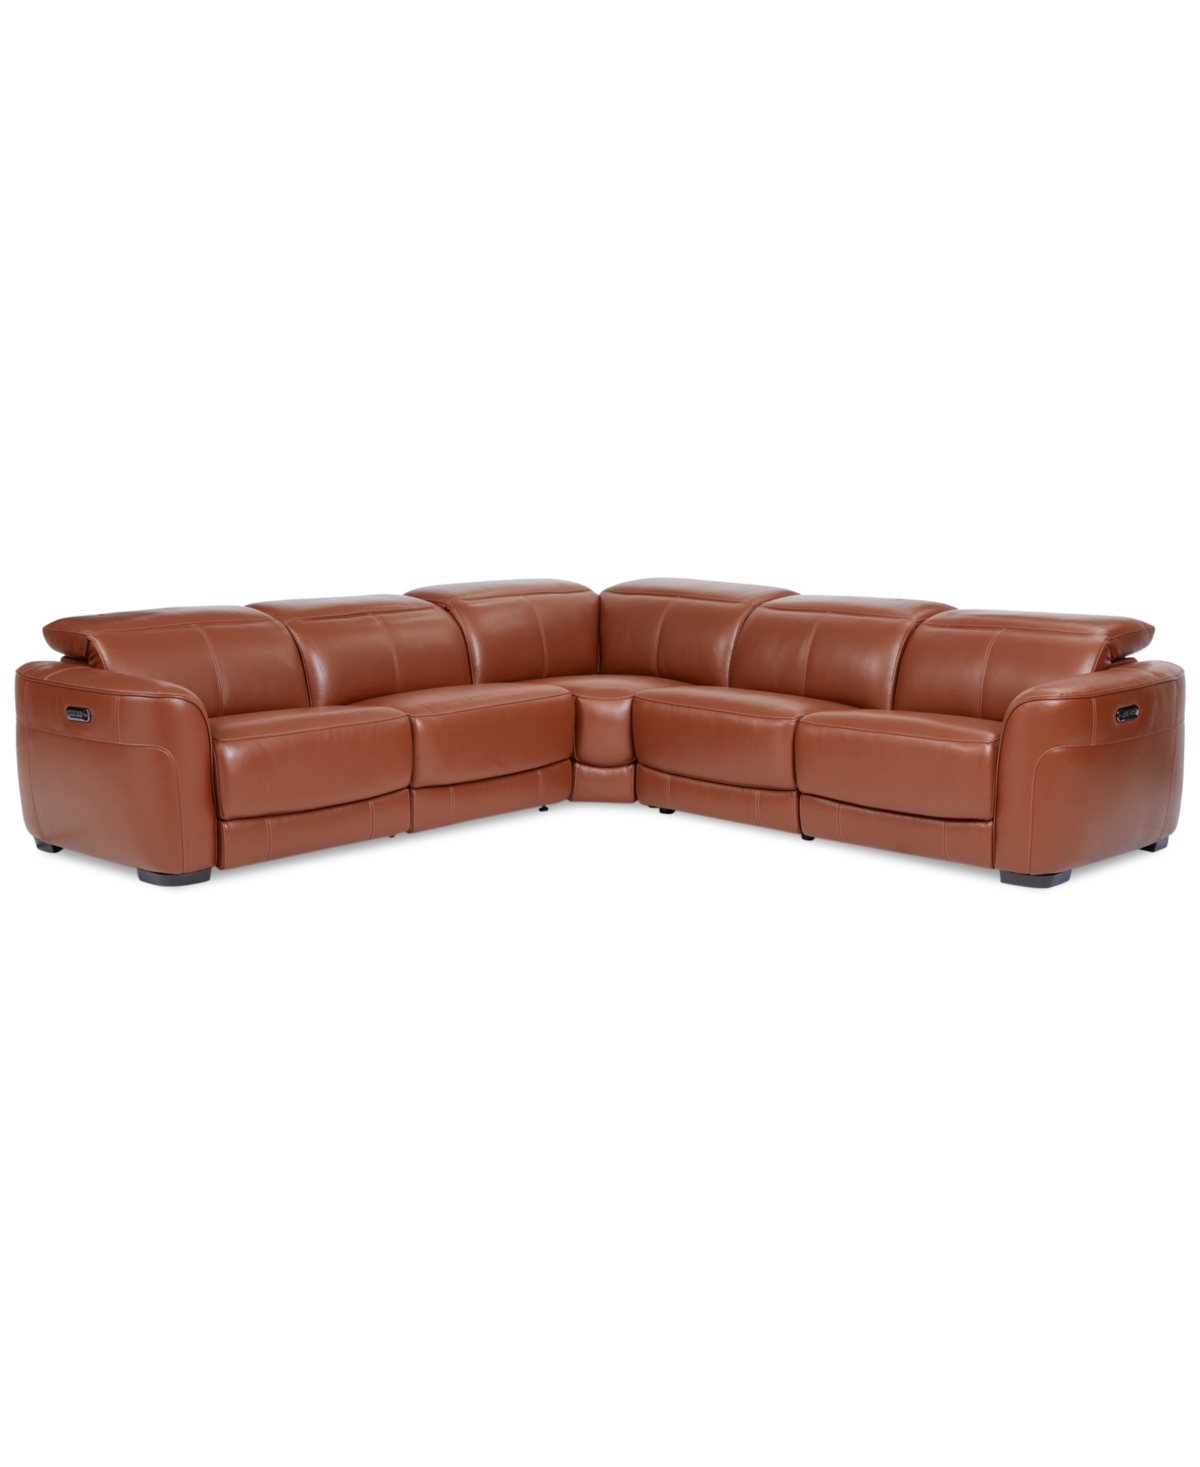 Lexanna 5-Pc. Leather Sectional with 3 Power Motion Recliners, Created for Macys